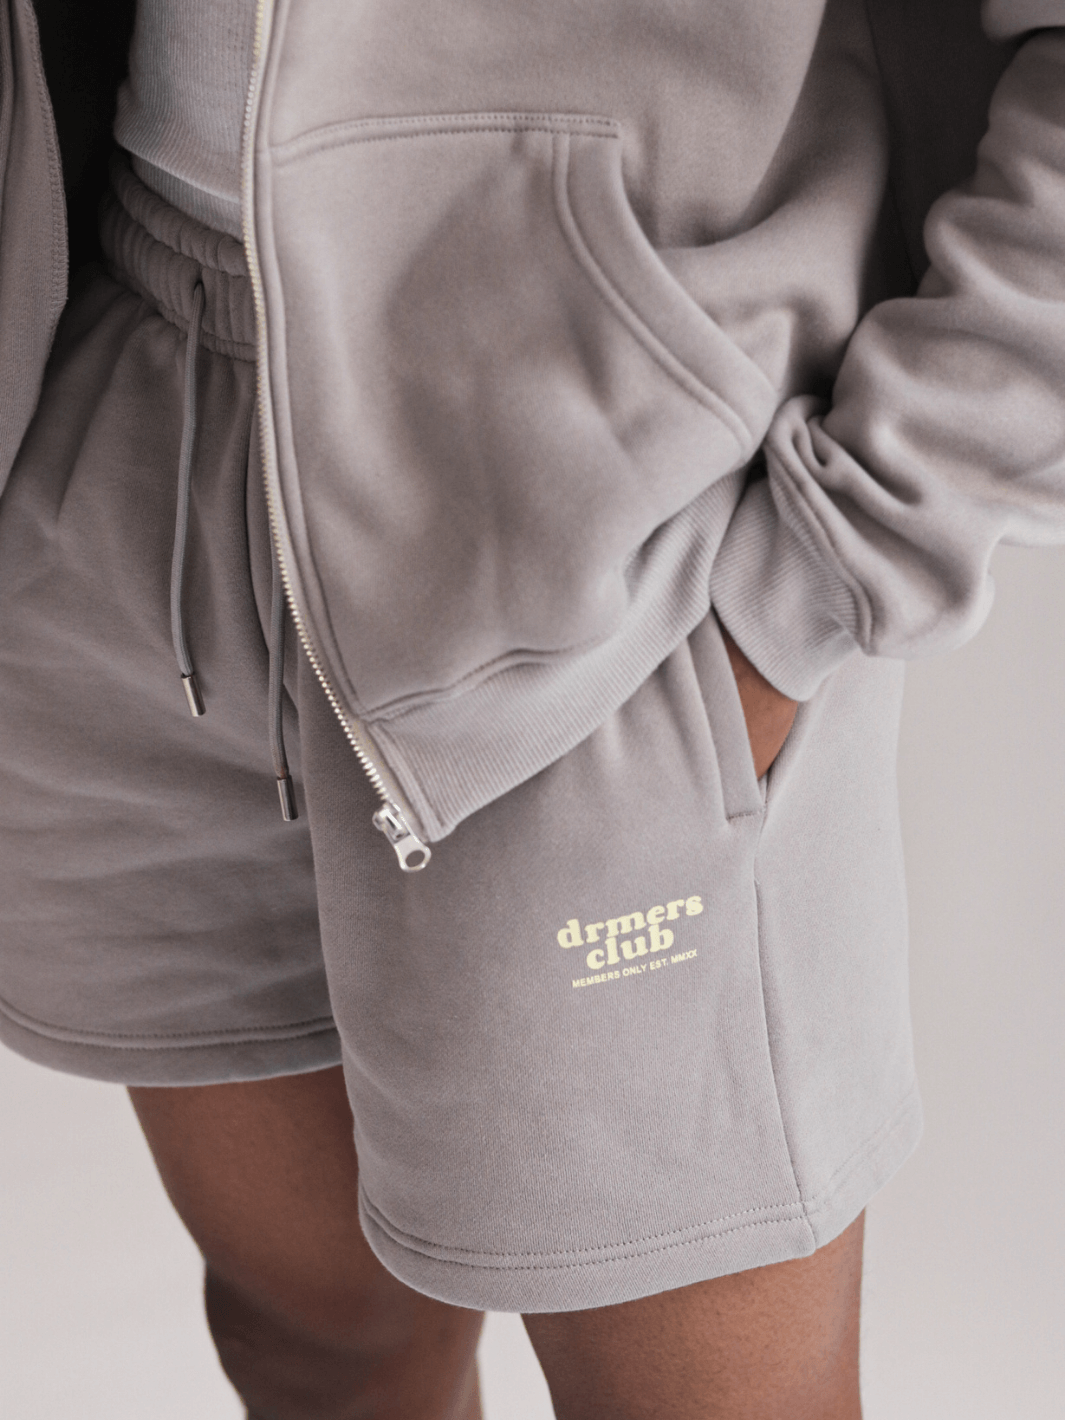 members only sweat shorts - stone grey